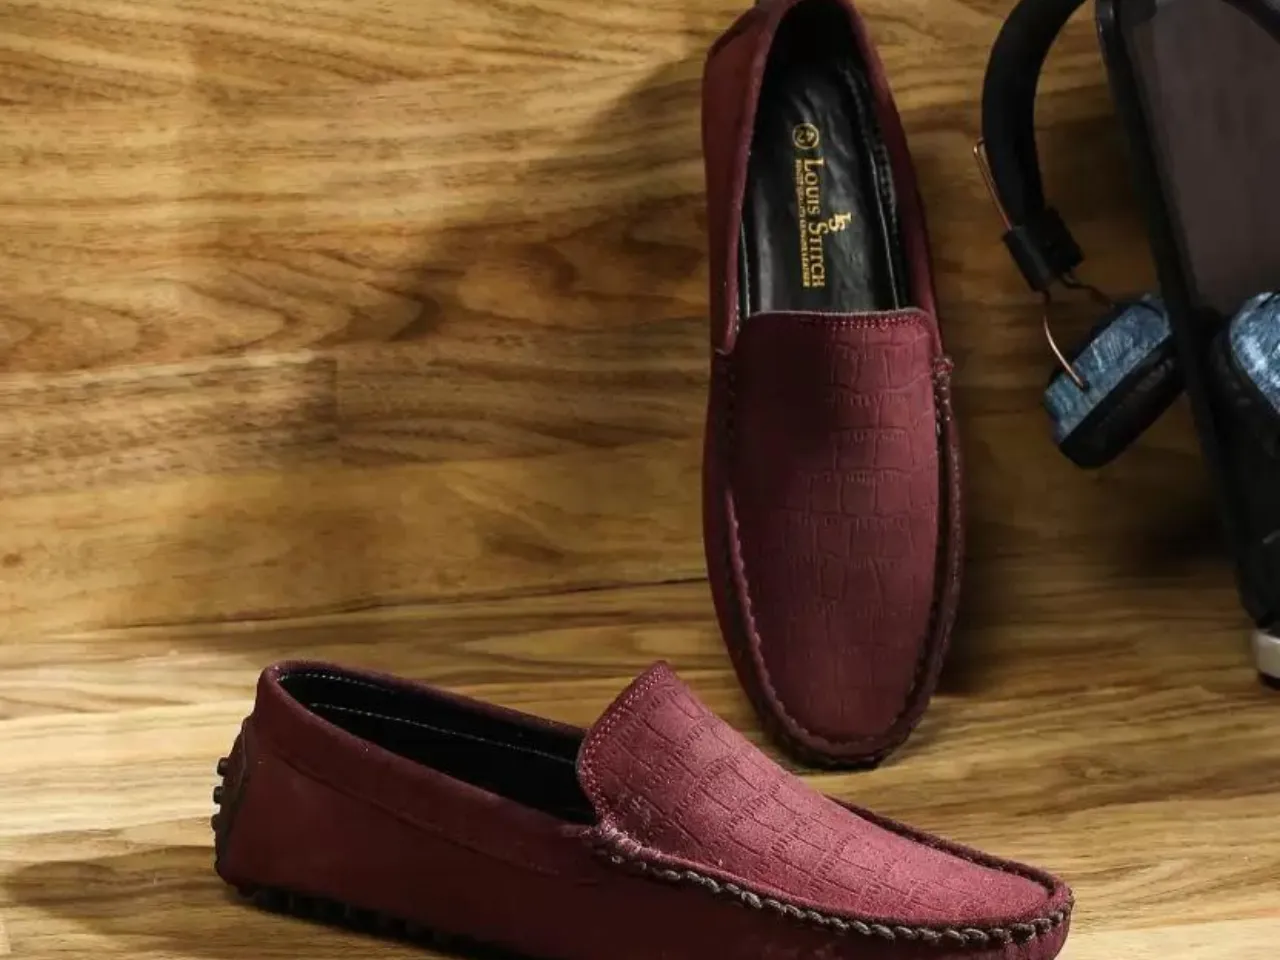 Men's luxury footwear and fashion brand Louis Stitch raises funding from PVR Founder's family office